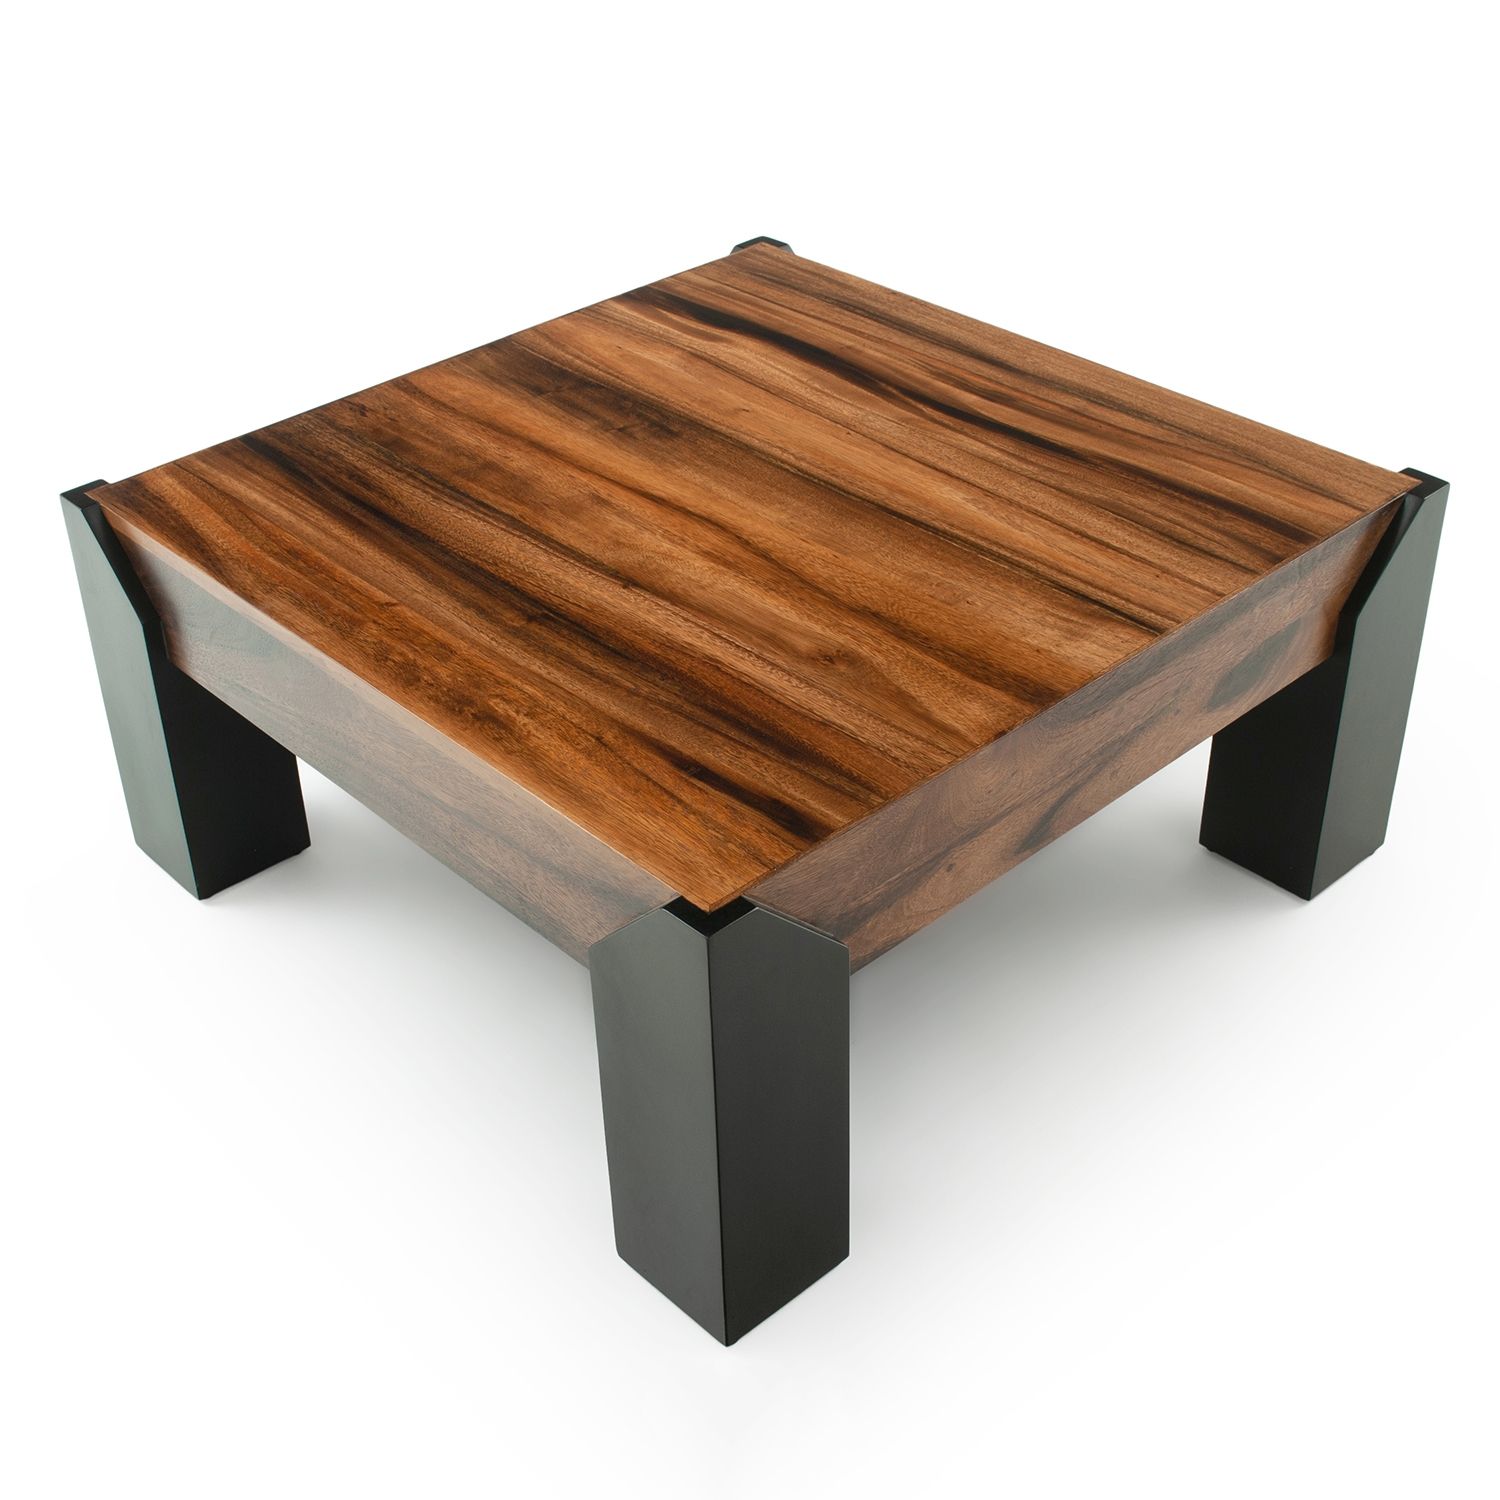 Buy Arcade Solid Wood Coffee Table in Walnut FinishOnline- At Home